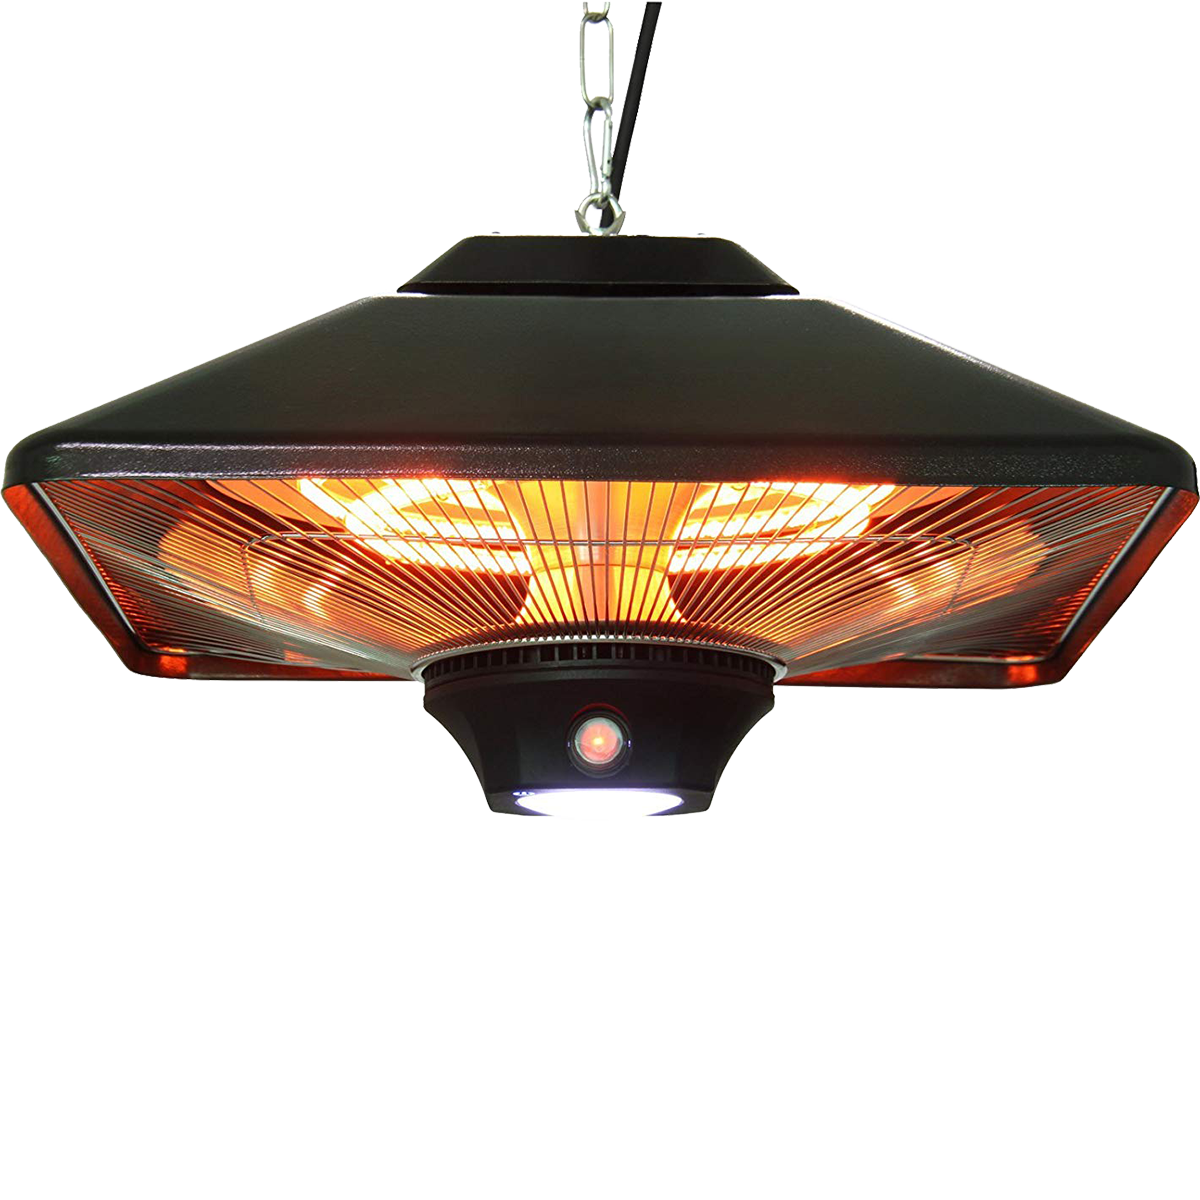 Ener-G+ Hanging Infrared Electric Outdoor Heater